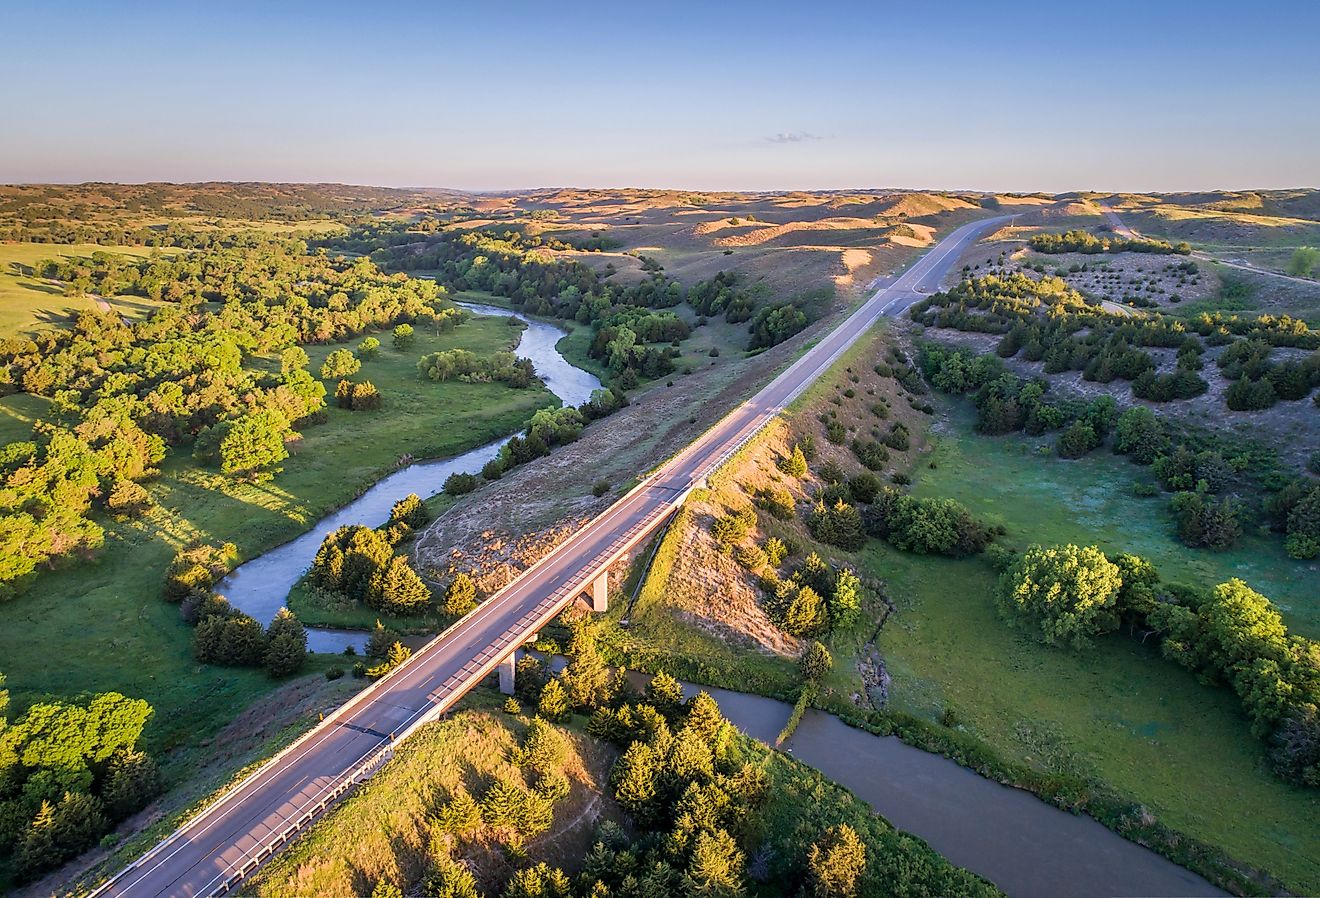 Aerial view of a highway and bridge over the Dismal River in the Nebraska Sandhills near Thedford. Image credit marekuliasz via Shutterstock.